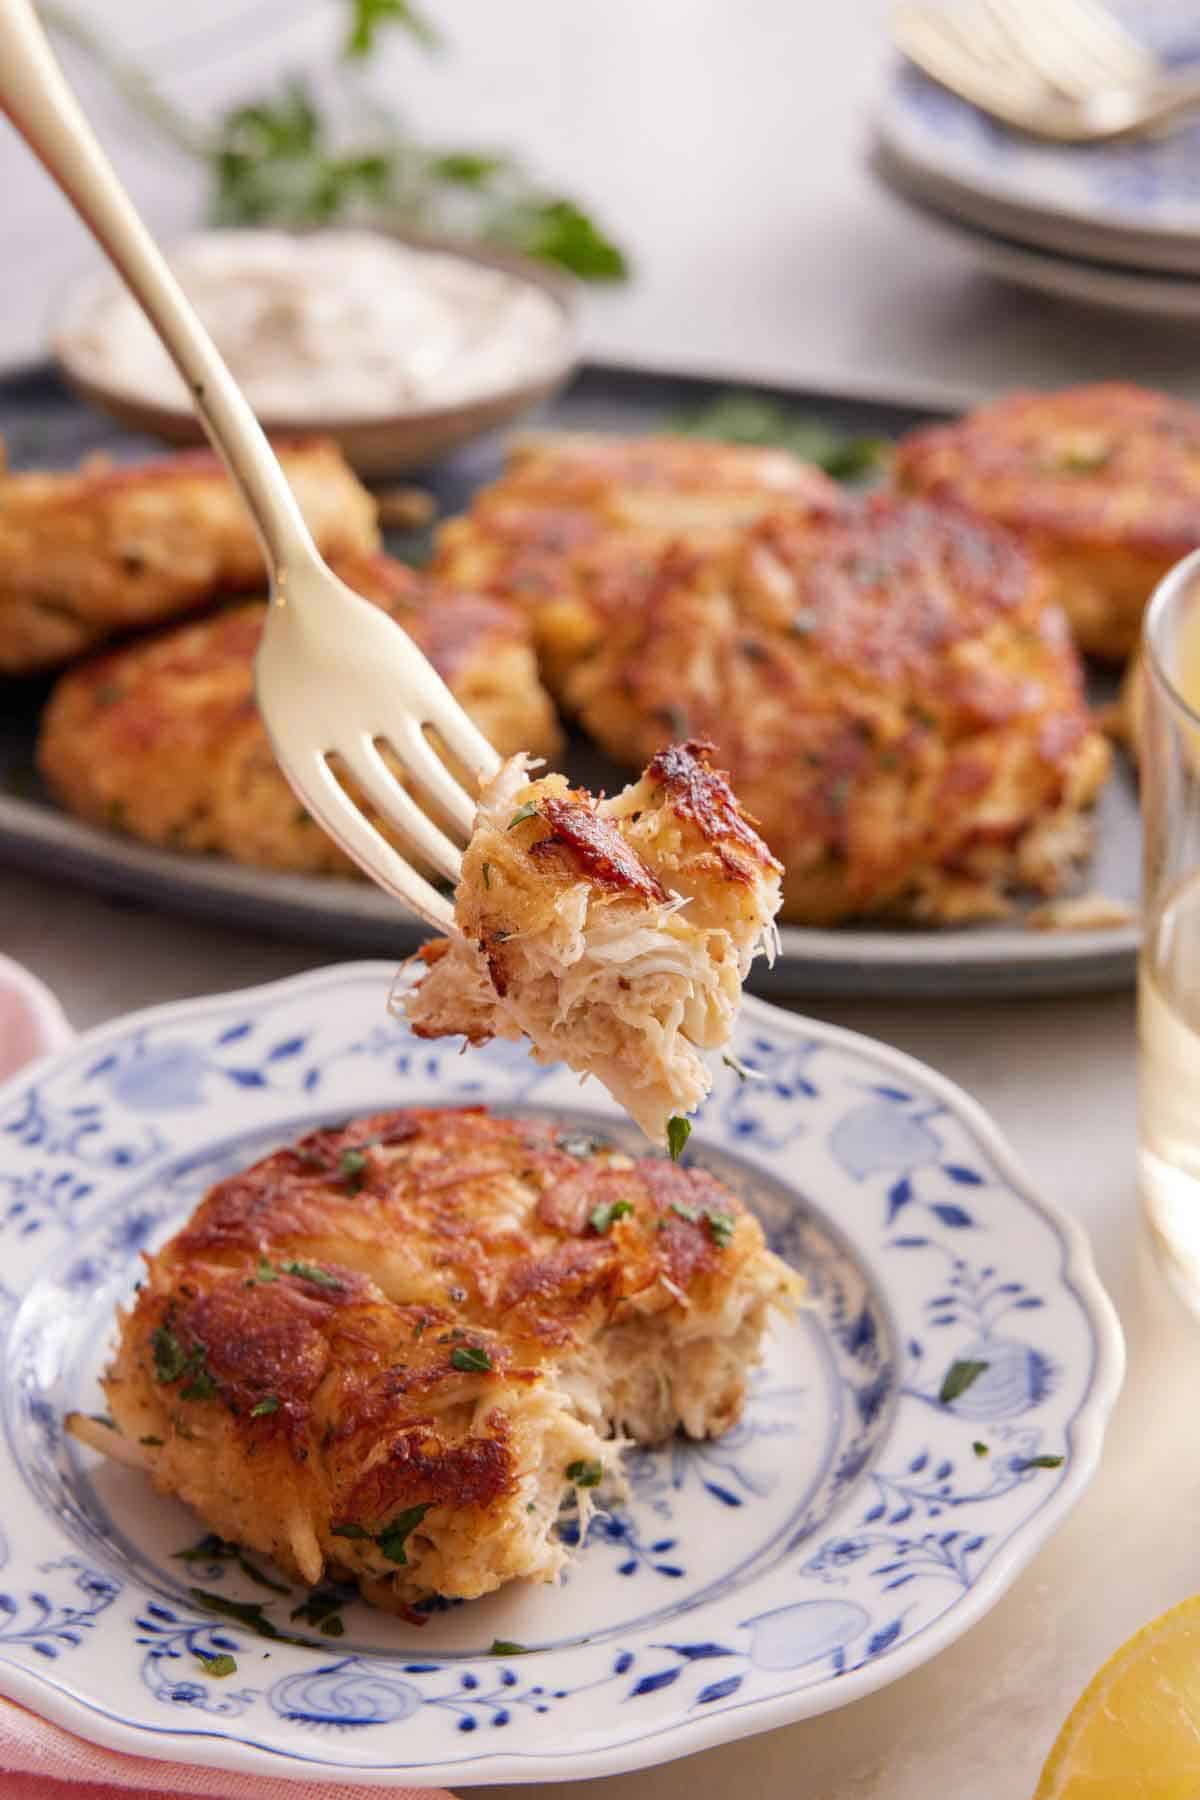 A fork lifting up a bite of crab cakes from the piece on the plate.